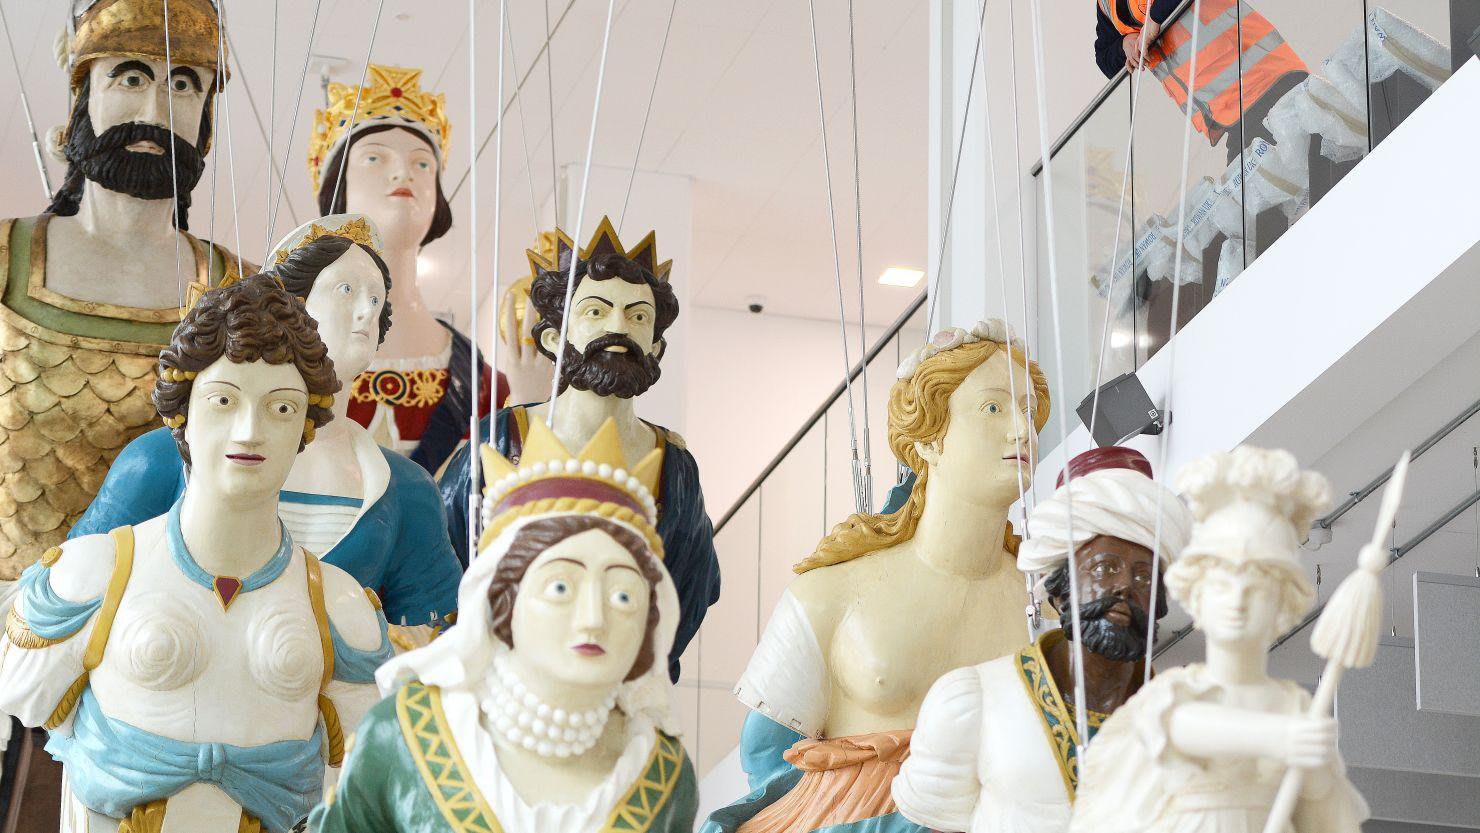 Rescued From Rot, 19th-Century Naval Figureheads to Feature in New Exhibit